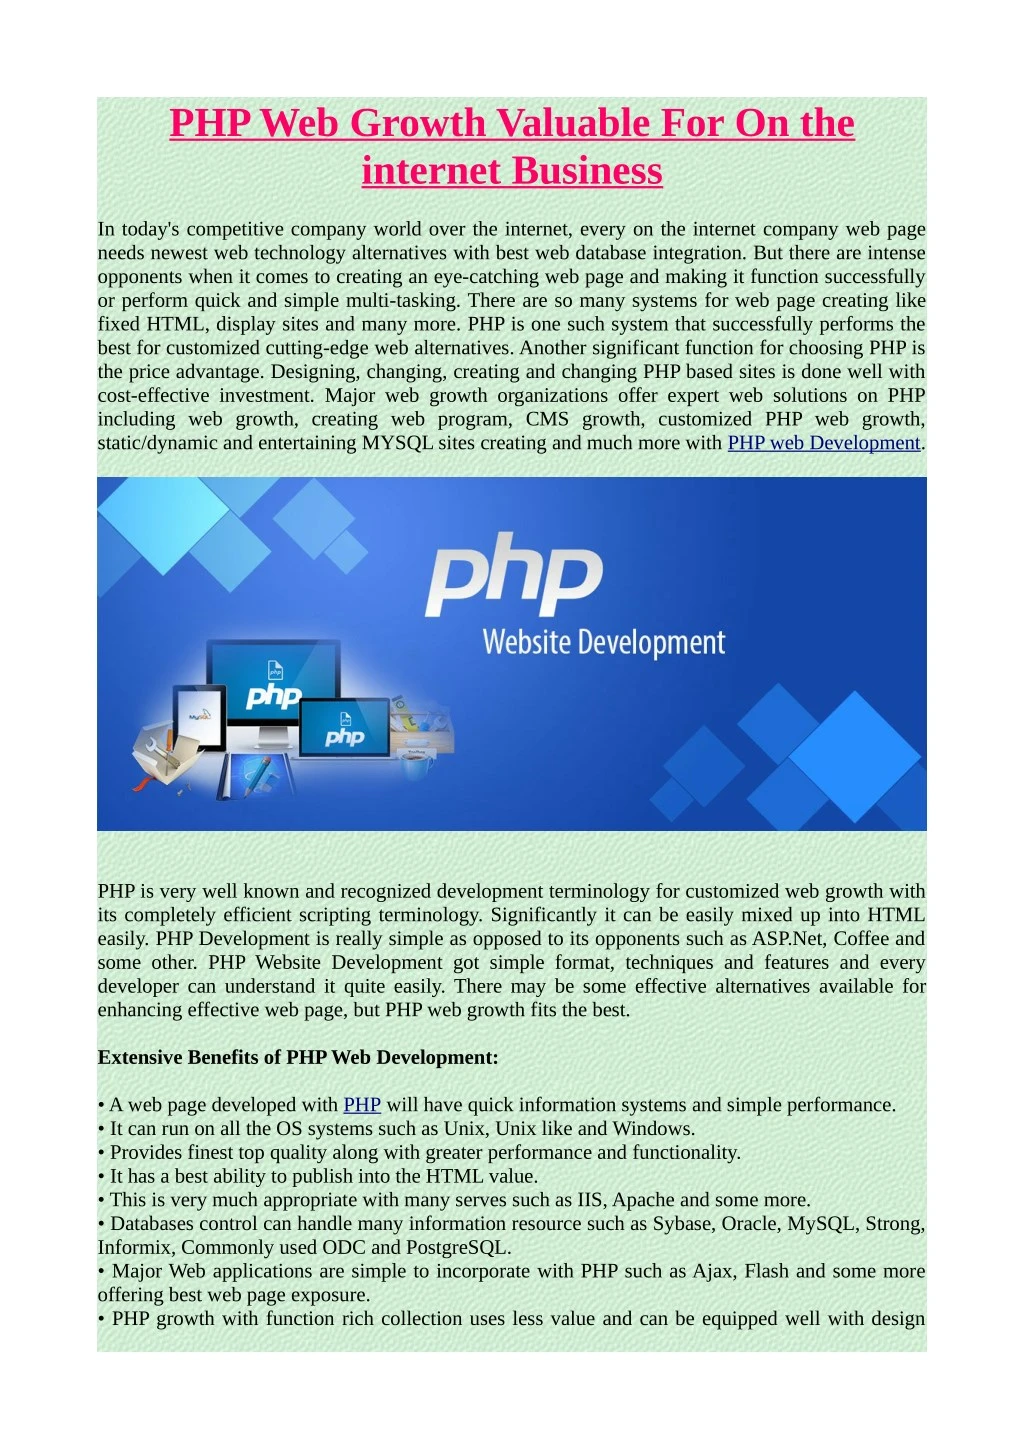 php web growth valuable for on the internet